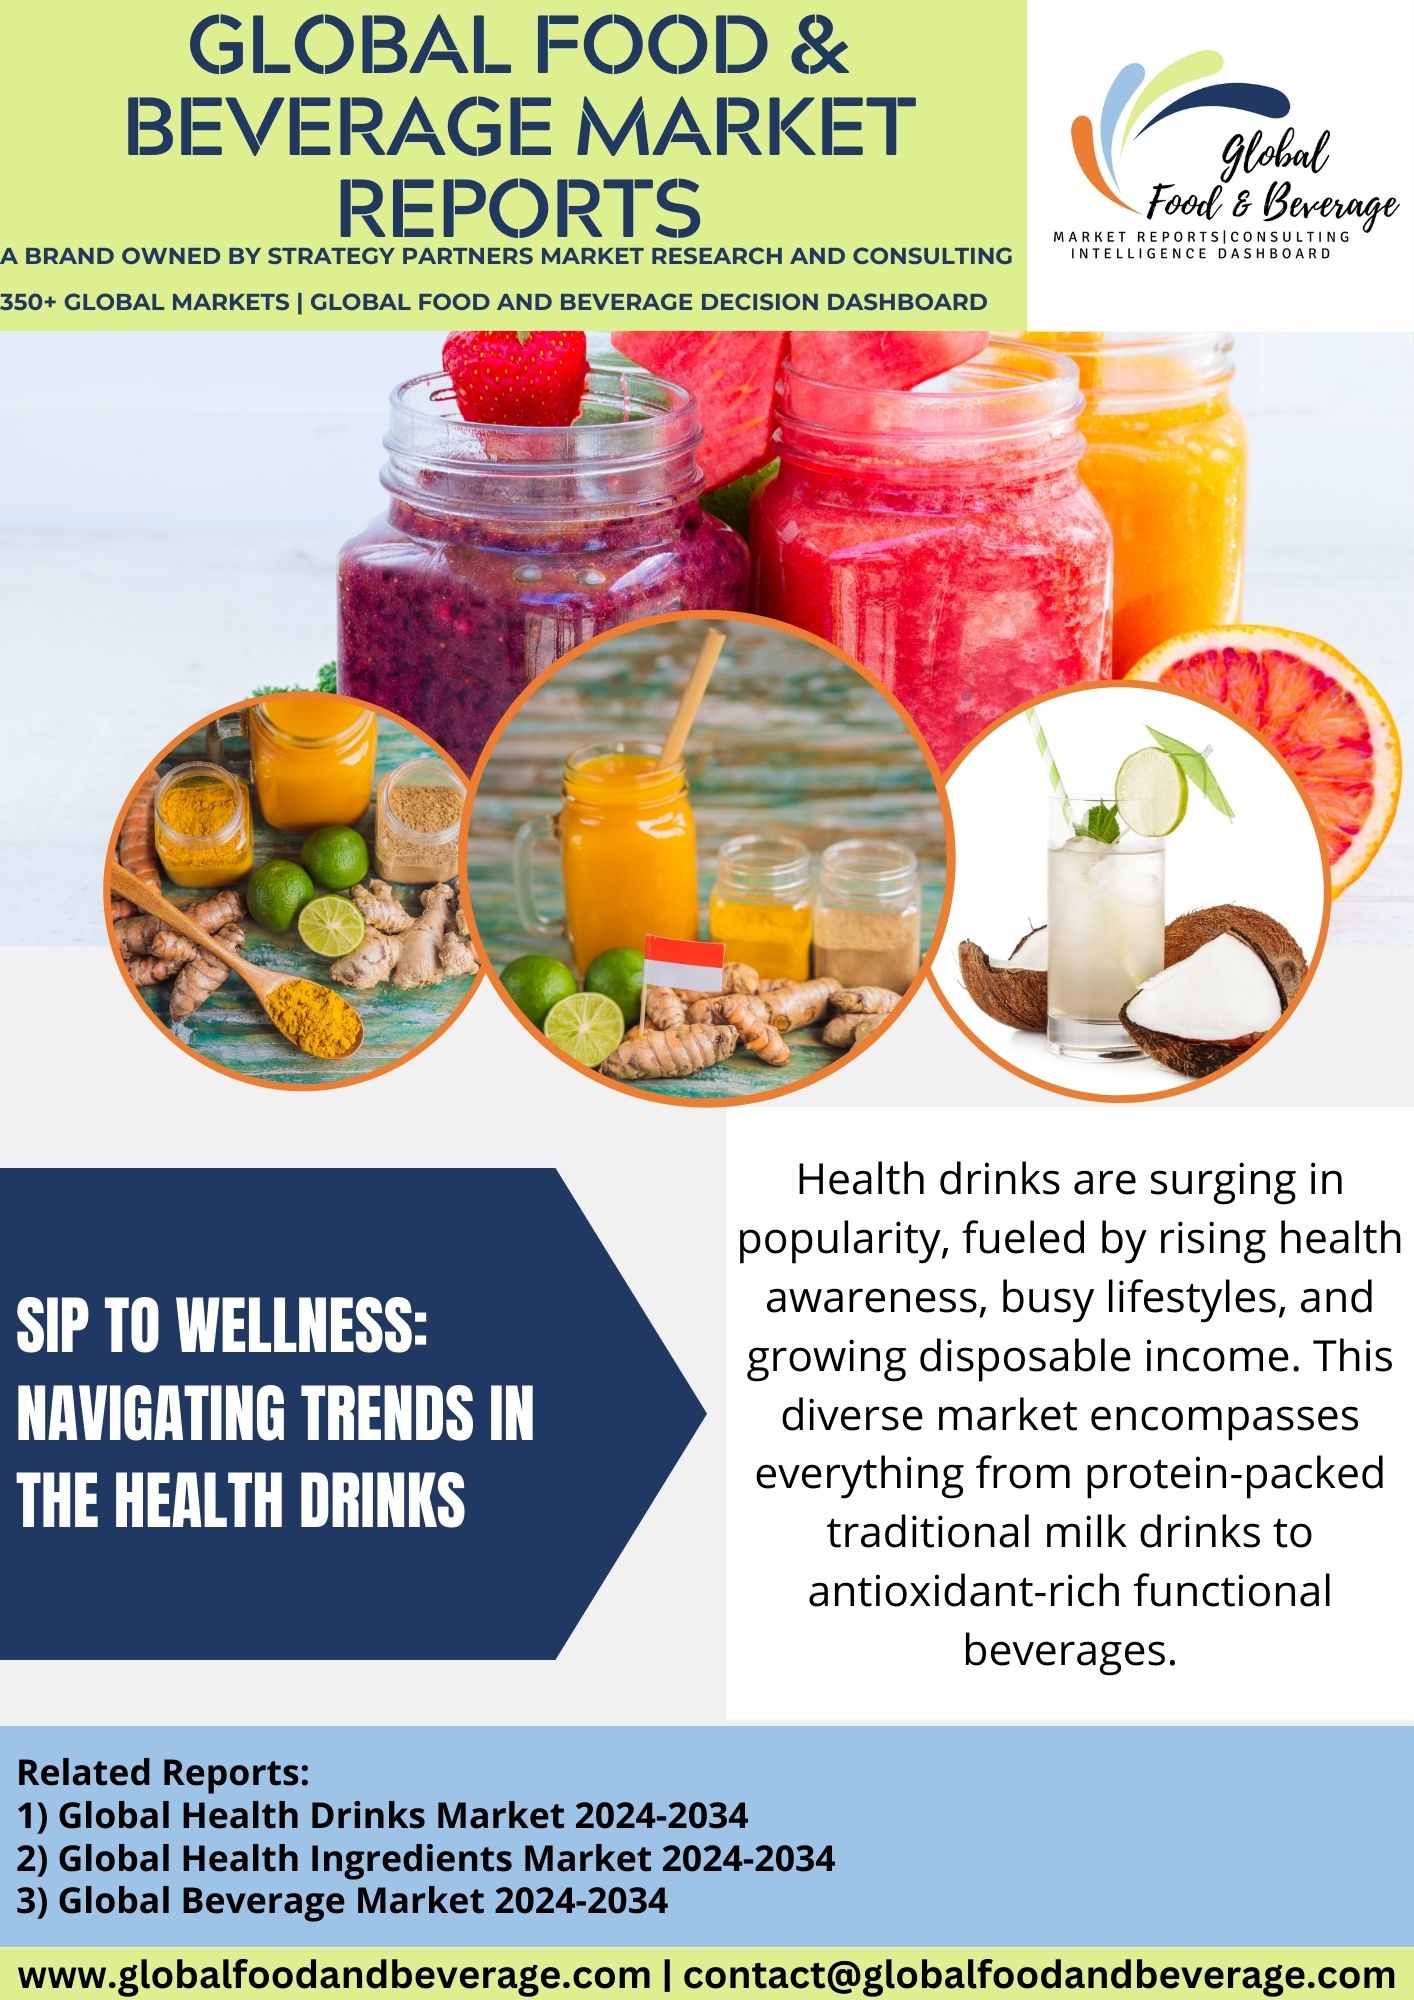 Navigating Trends in the Health Drinks Market